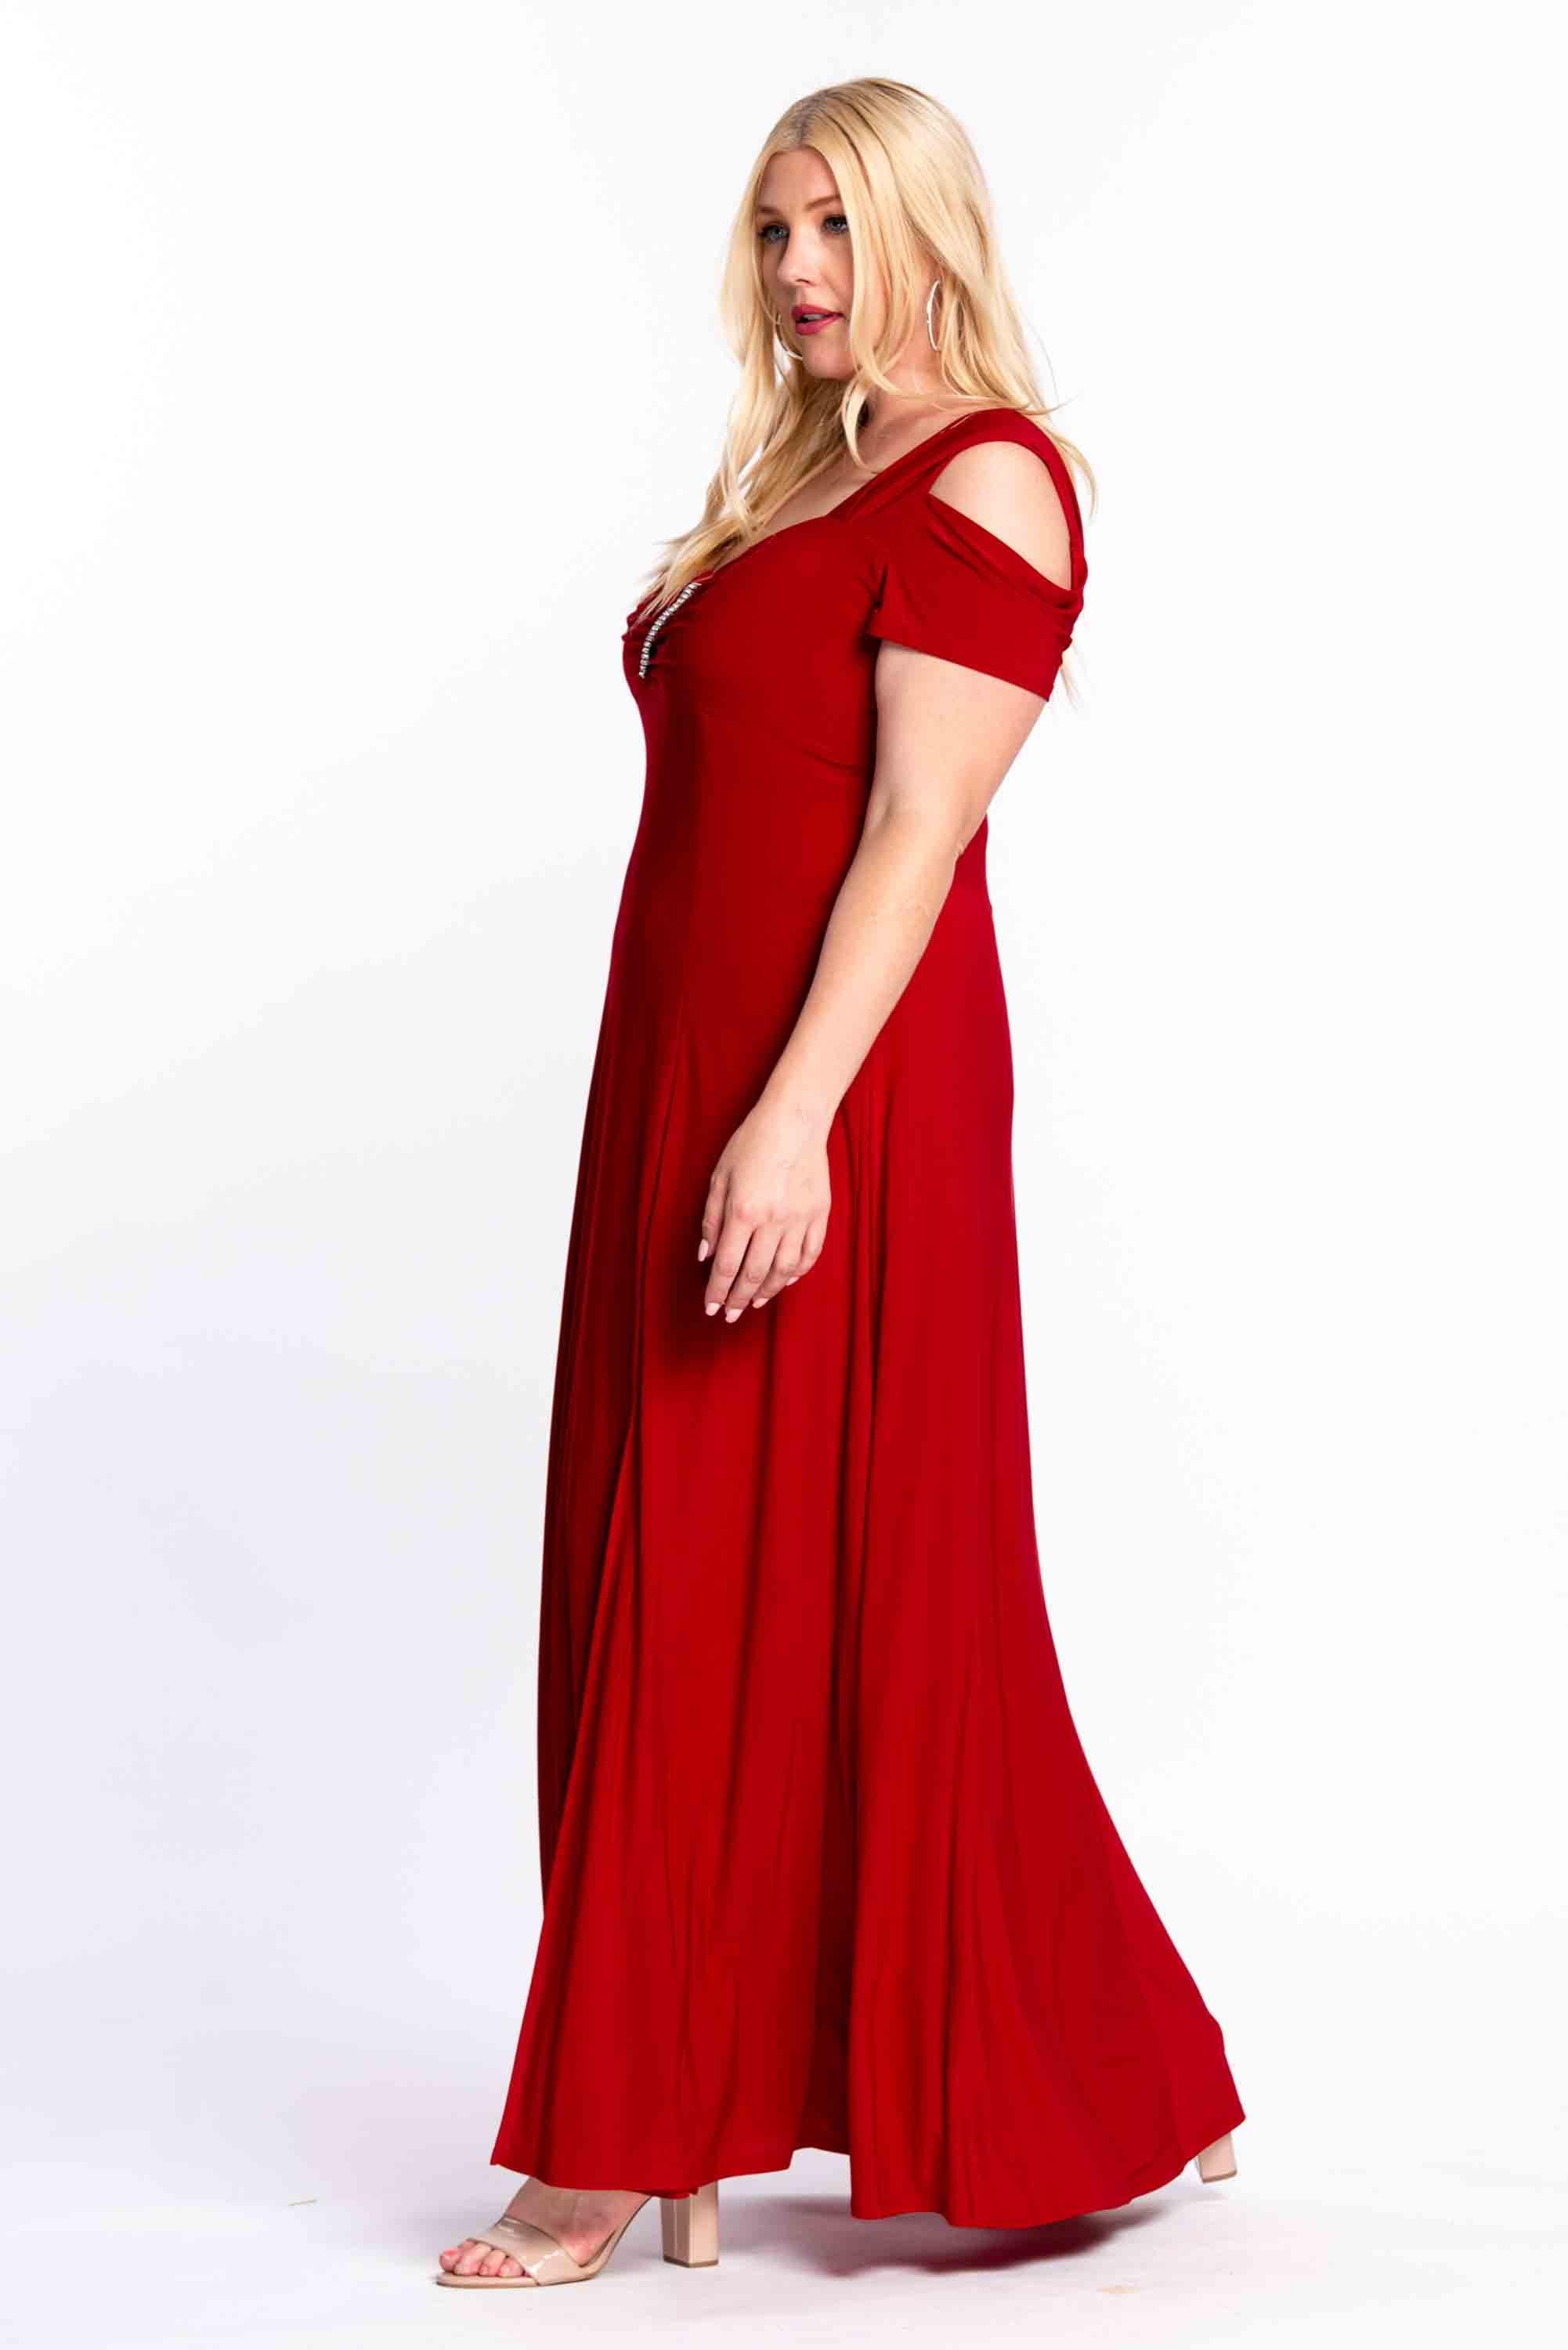 Plus-Size Red Dresses, Evening Dresses in Plus Sizes